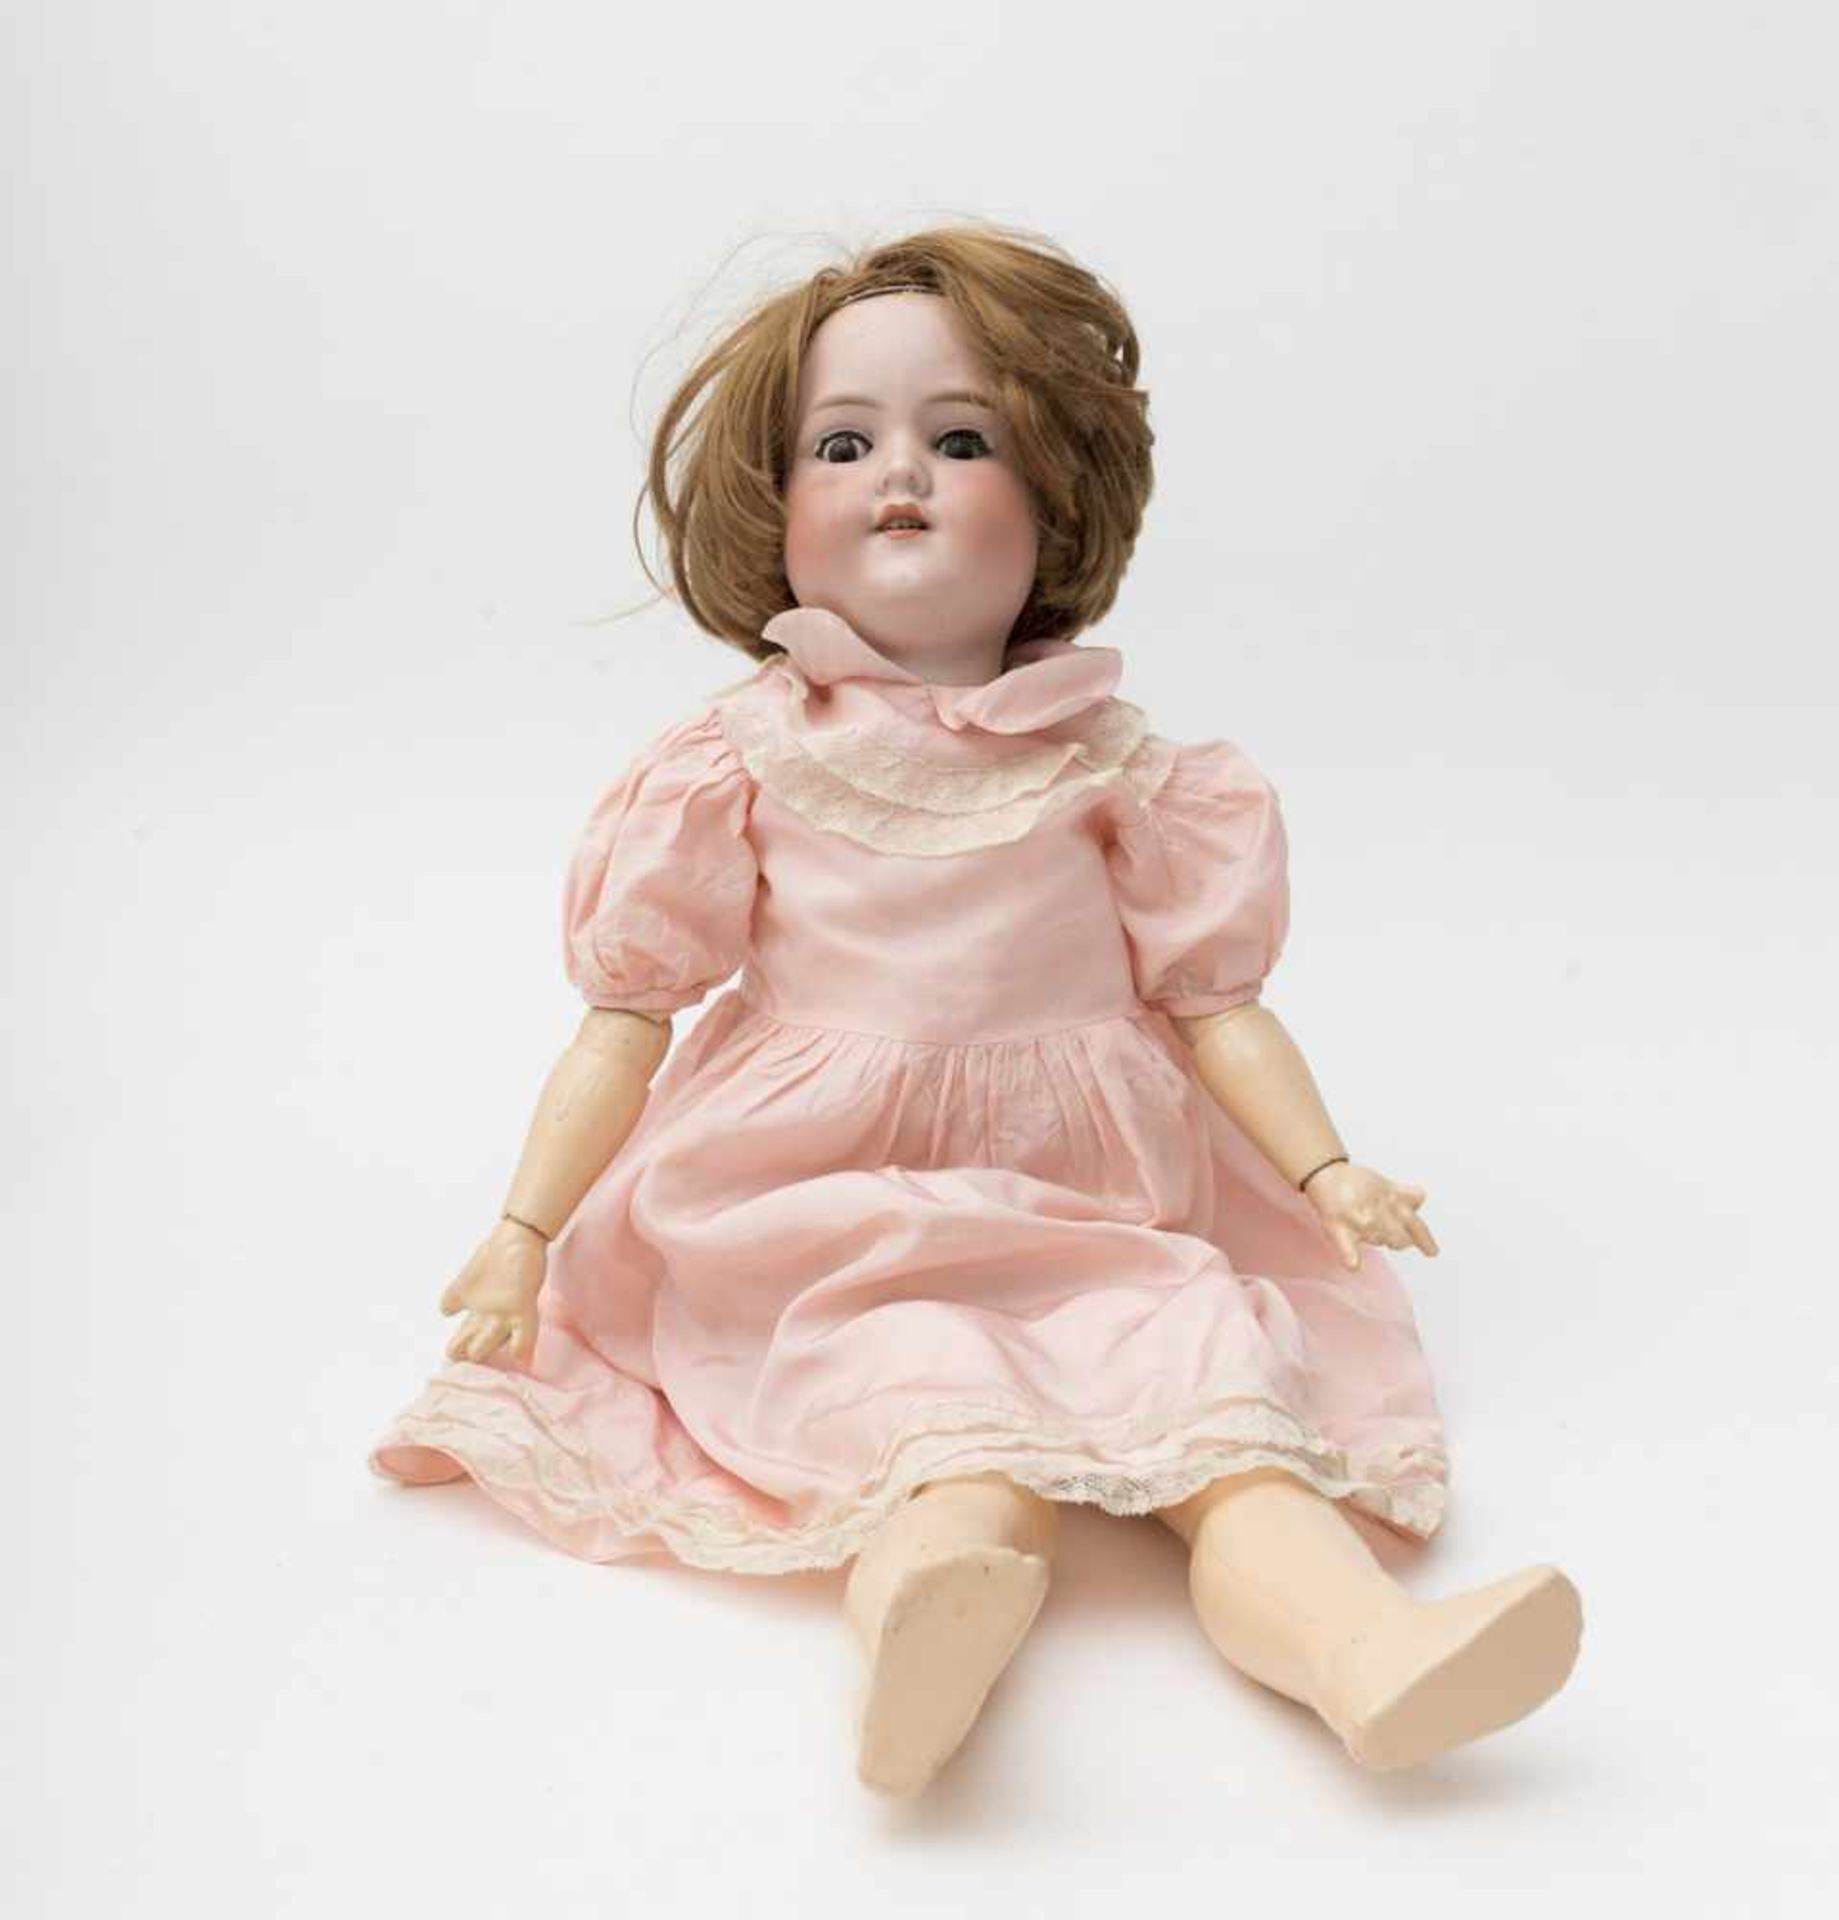 German doll With biscuit head, open mouth, branded “ARMAND MARSEILLE 390” size 8, brown sleeping